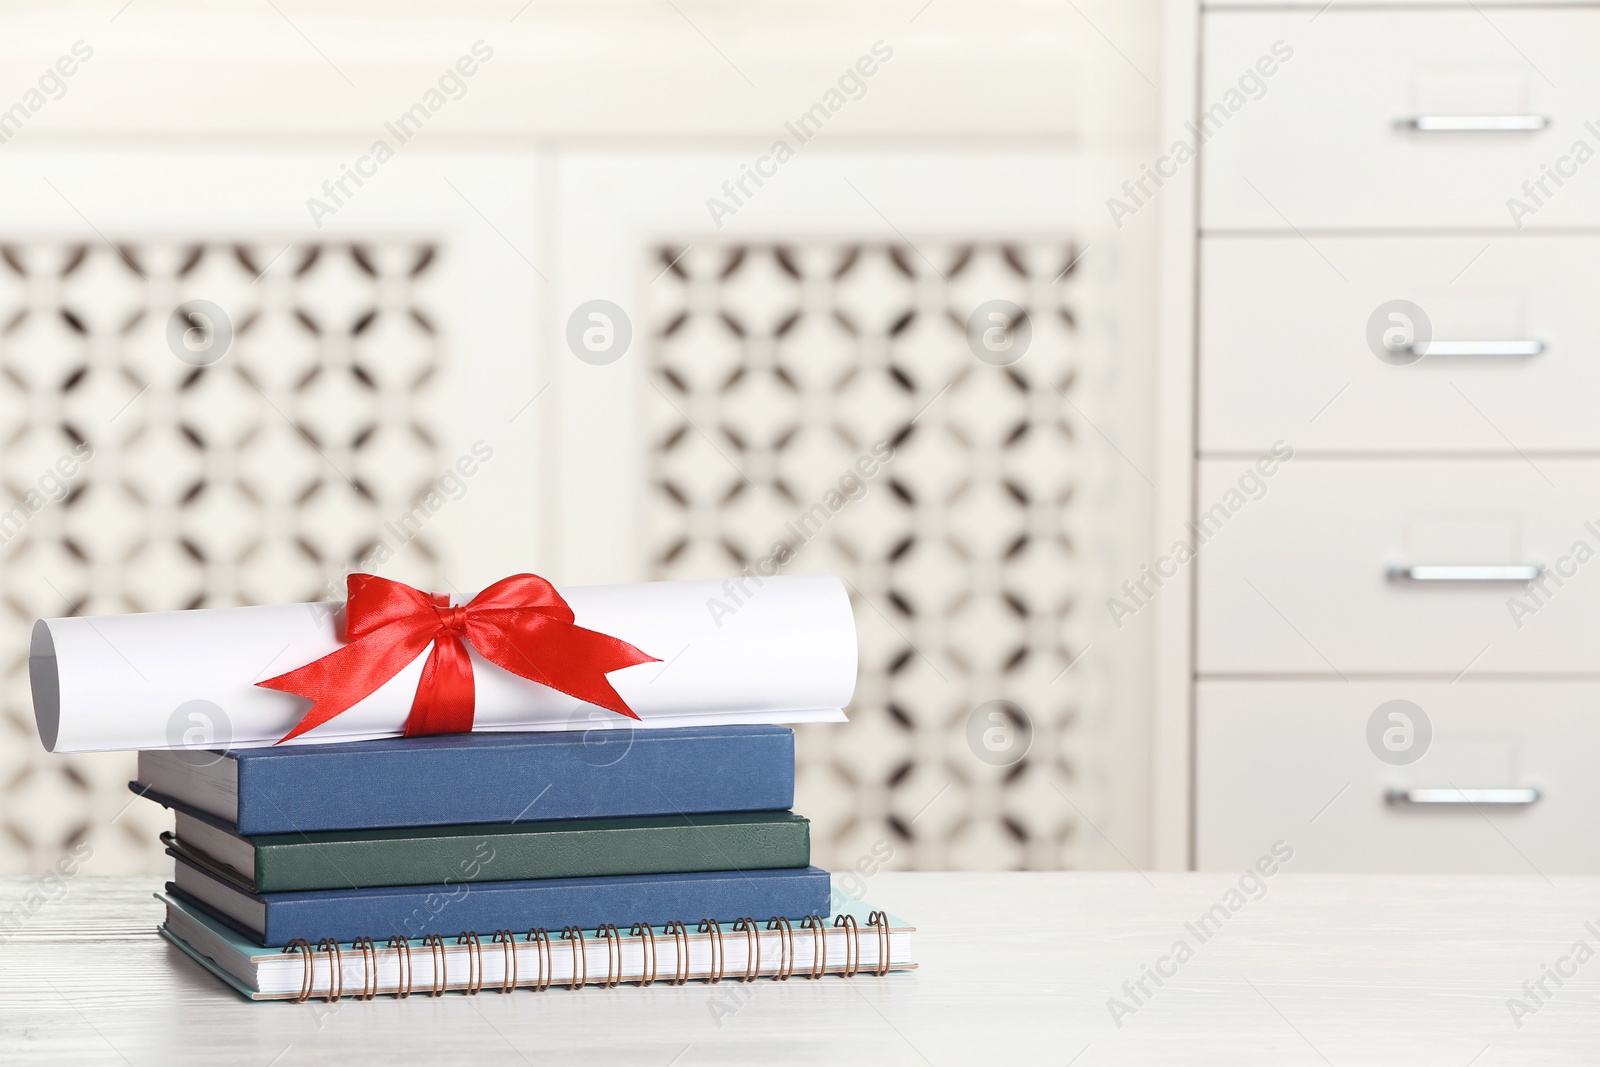 Photo of Graduate diploma with books and notebook on table against blurred background. Space for text